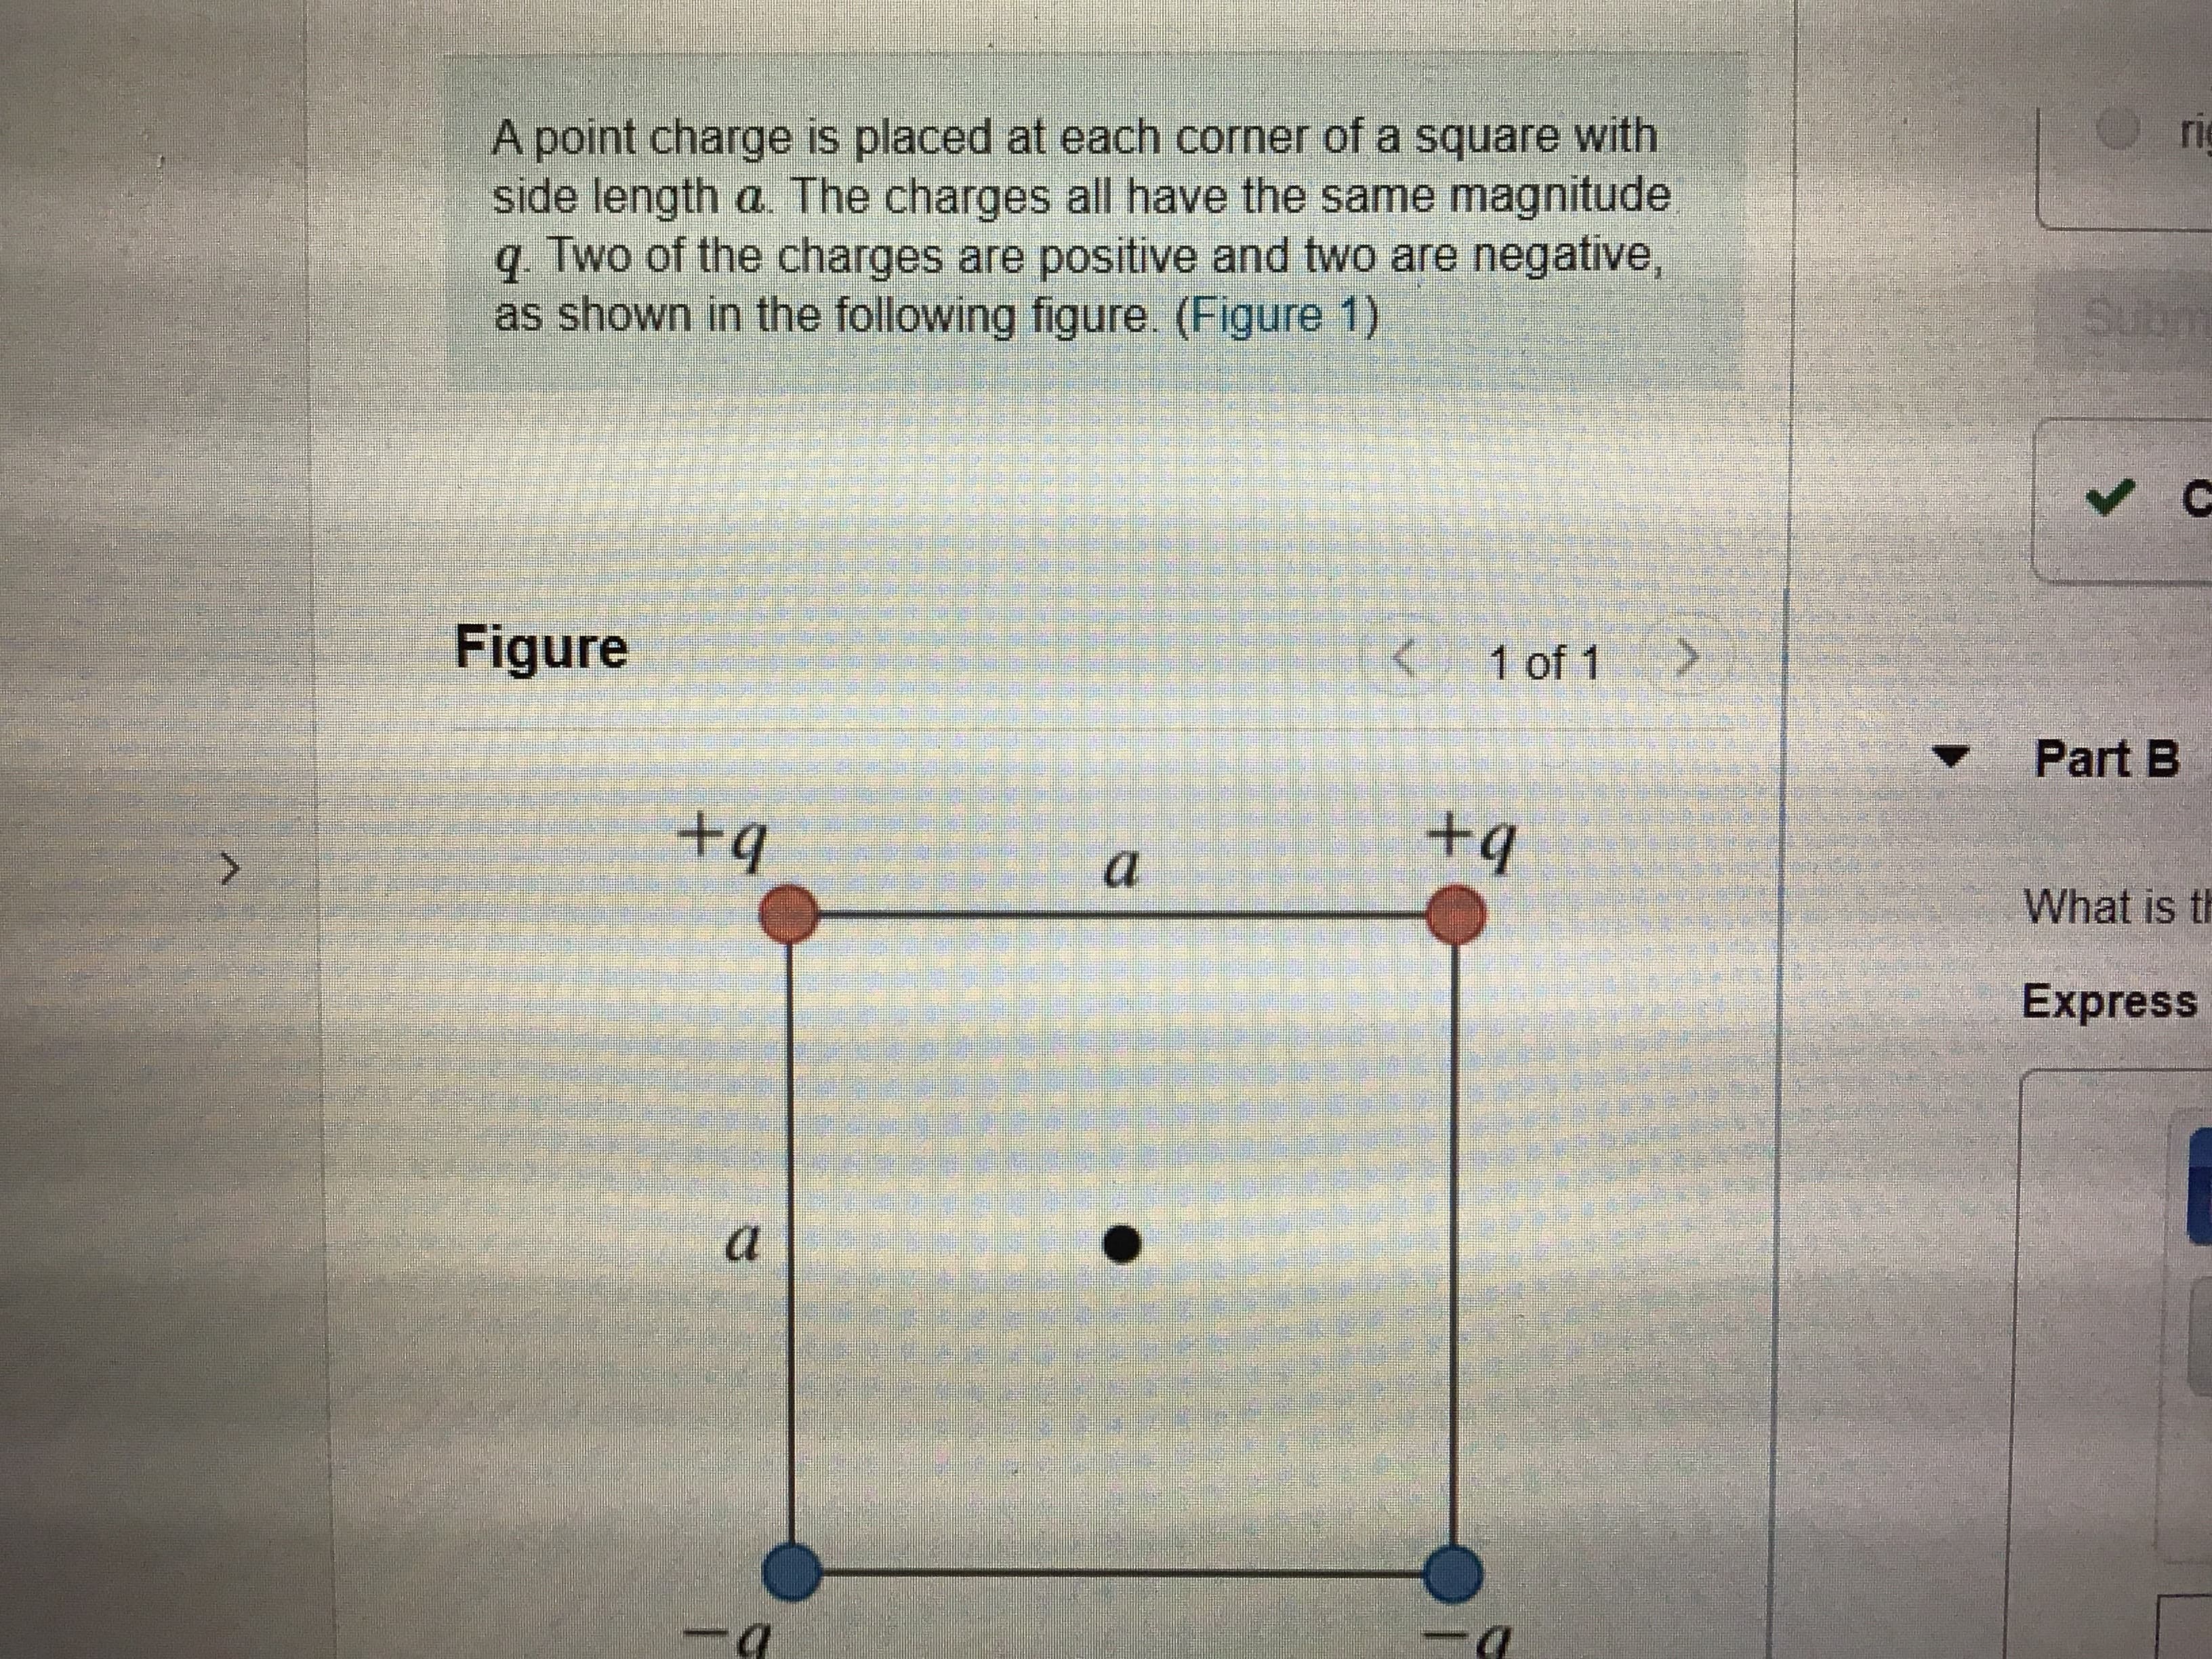 ri
A point charge is placed at each corner of a square with
side length a. The charges all have the same magnitude
q. Two of the charges are positive and two are negative,
as shown in the following figure. (Figure 1)
Subm
Figure
14 1 of 1
Part B
+q
+q
What is th
Express
